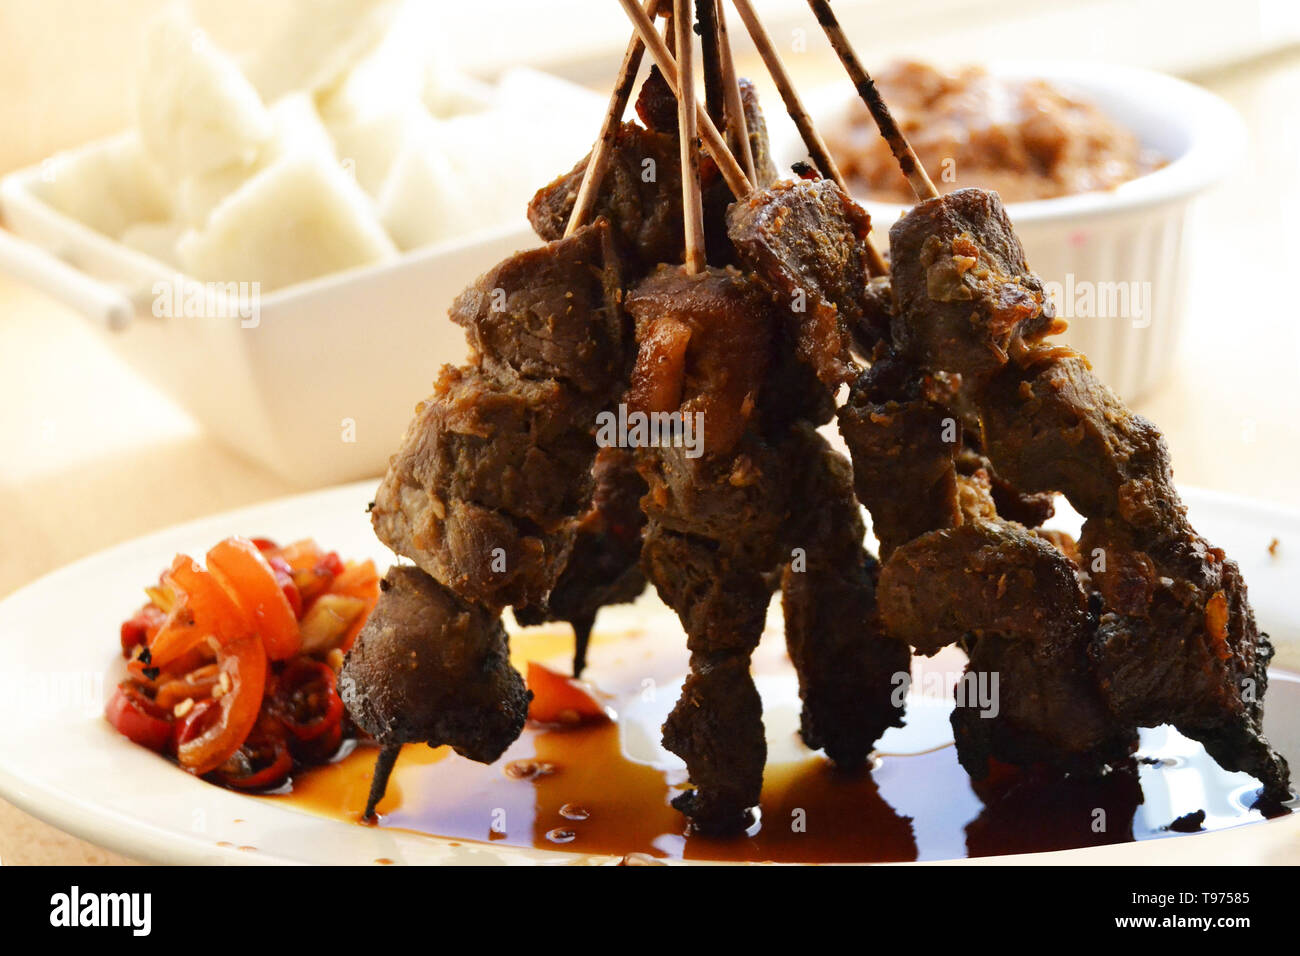 Satay Sate Lamb Chicken Skew with Ketupat or Rice Cake Indonesian Traditional Food Stock Photo